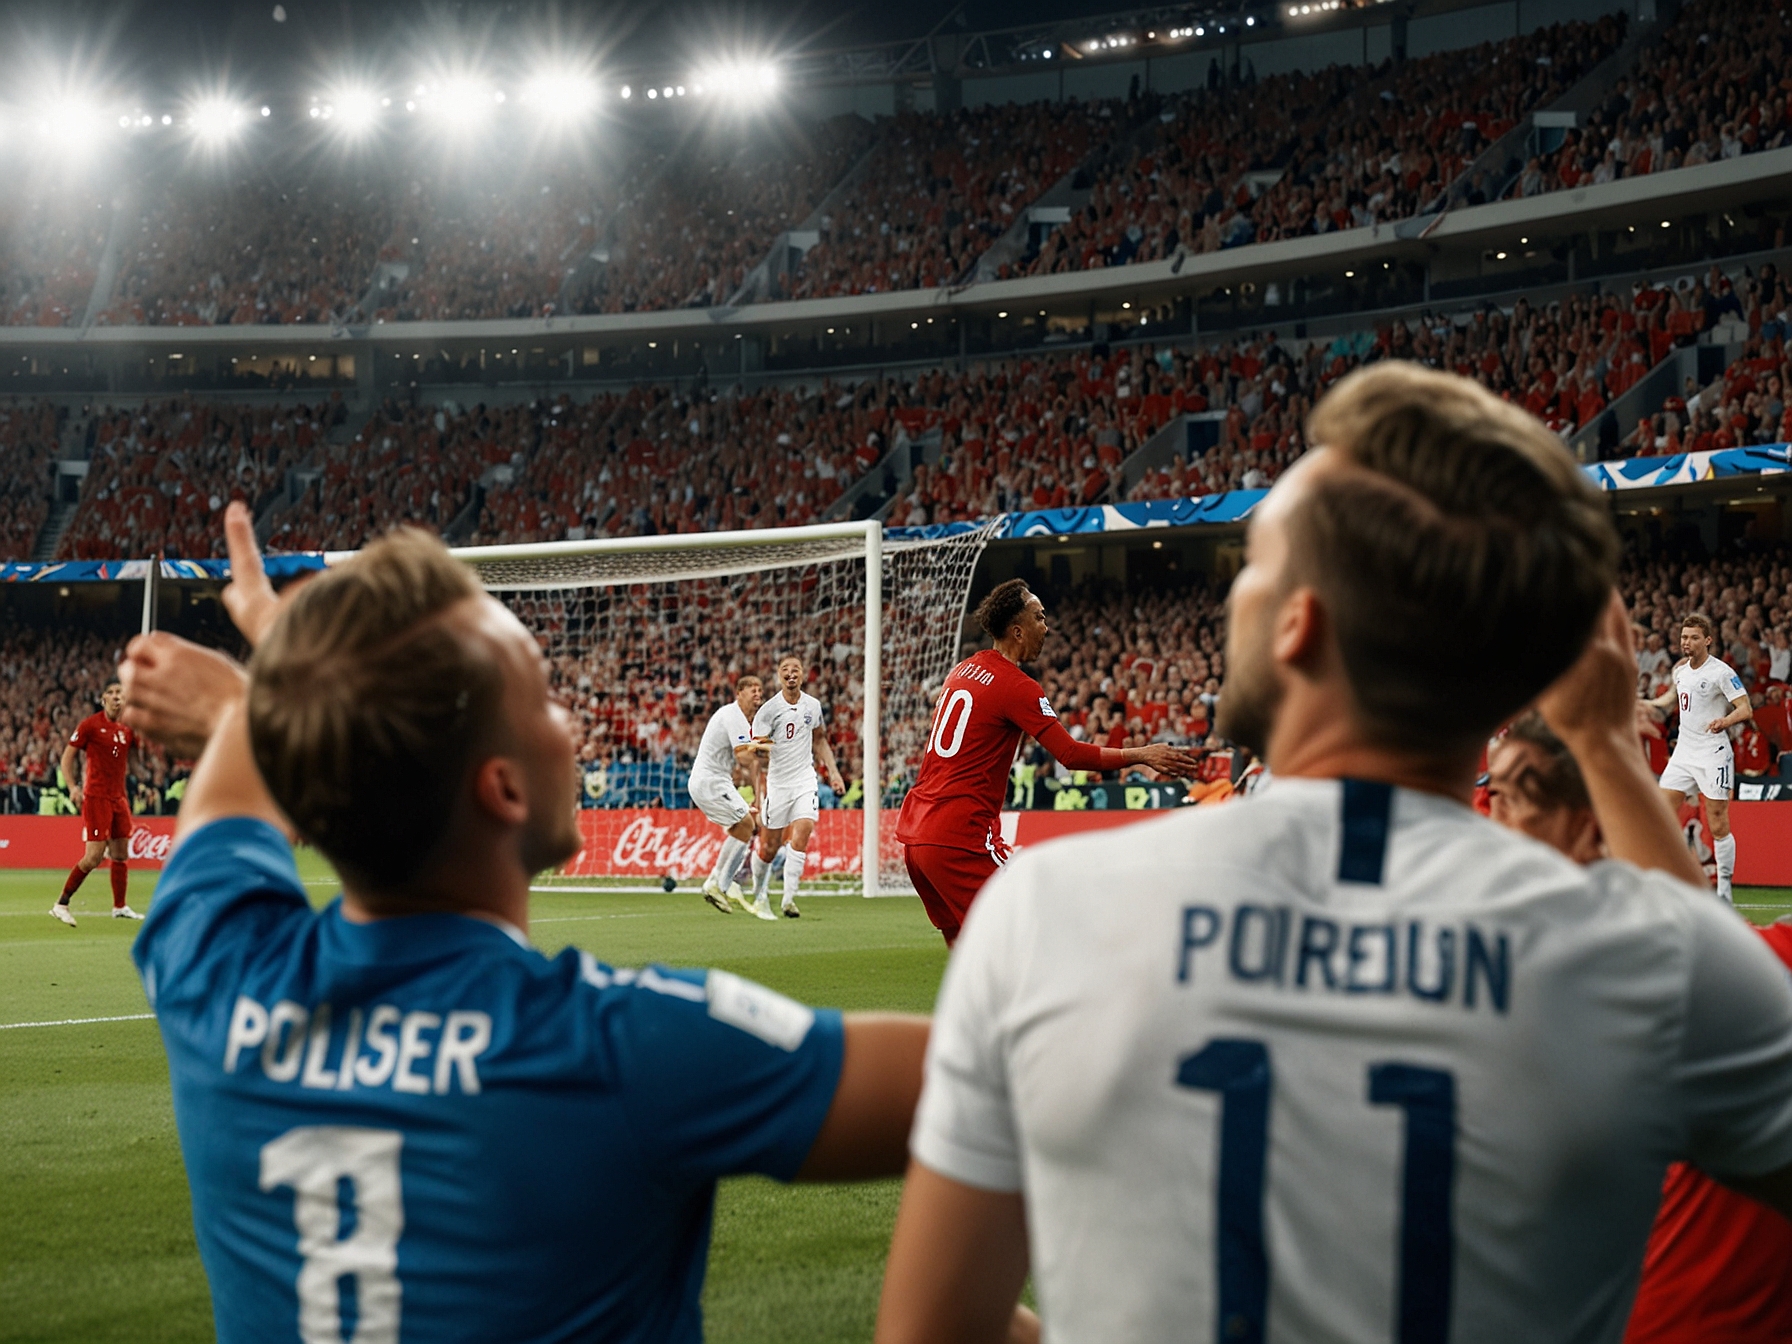 Denmark's Yussuf Poulsen scores the equalizing goal against England, showcasing the high stakes and dramatic intensity of the Euro 2024 clash, with Danish fans cheering loudly.